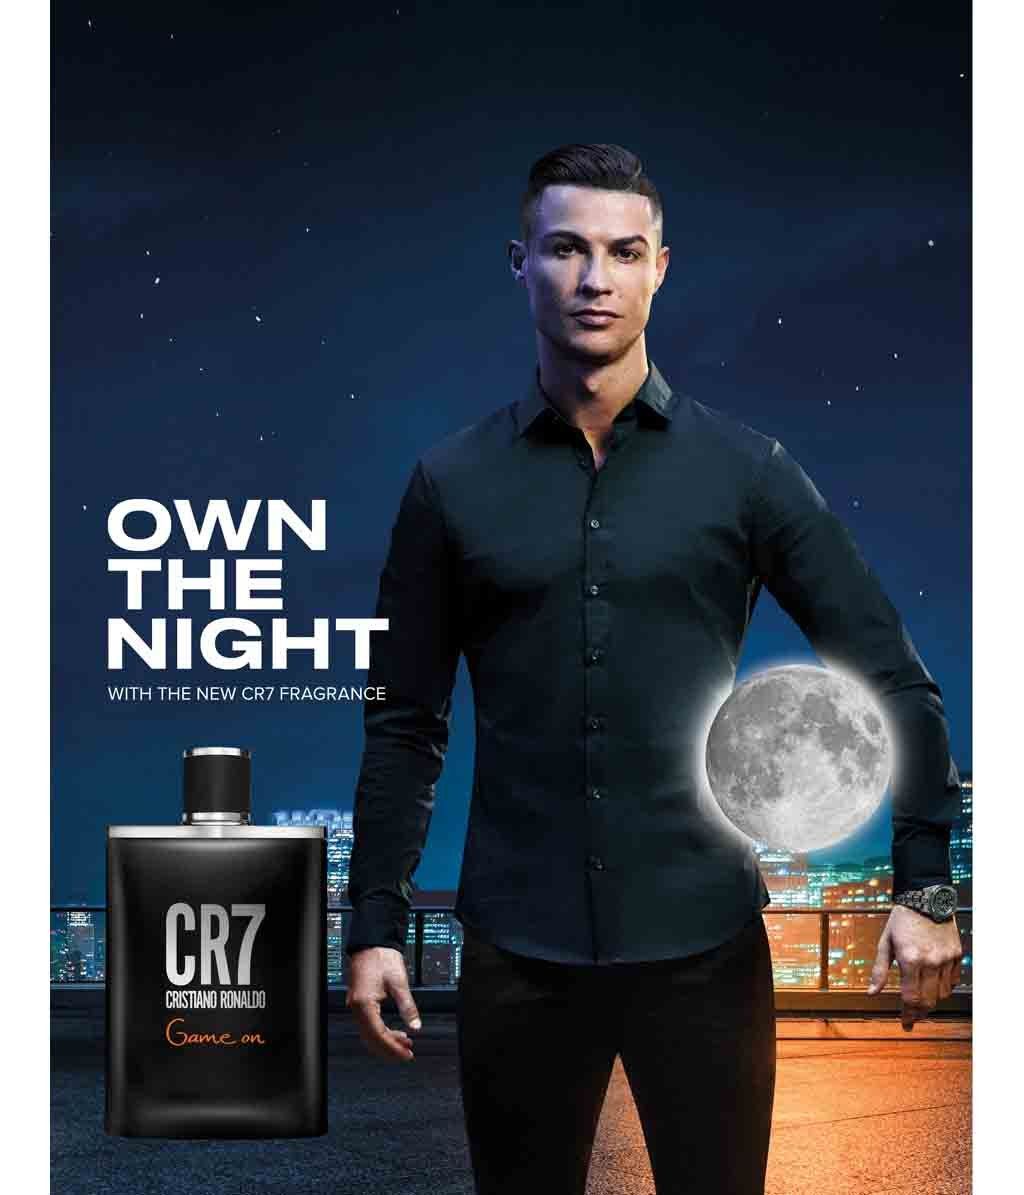 the new cr7